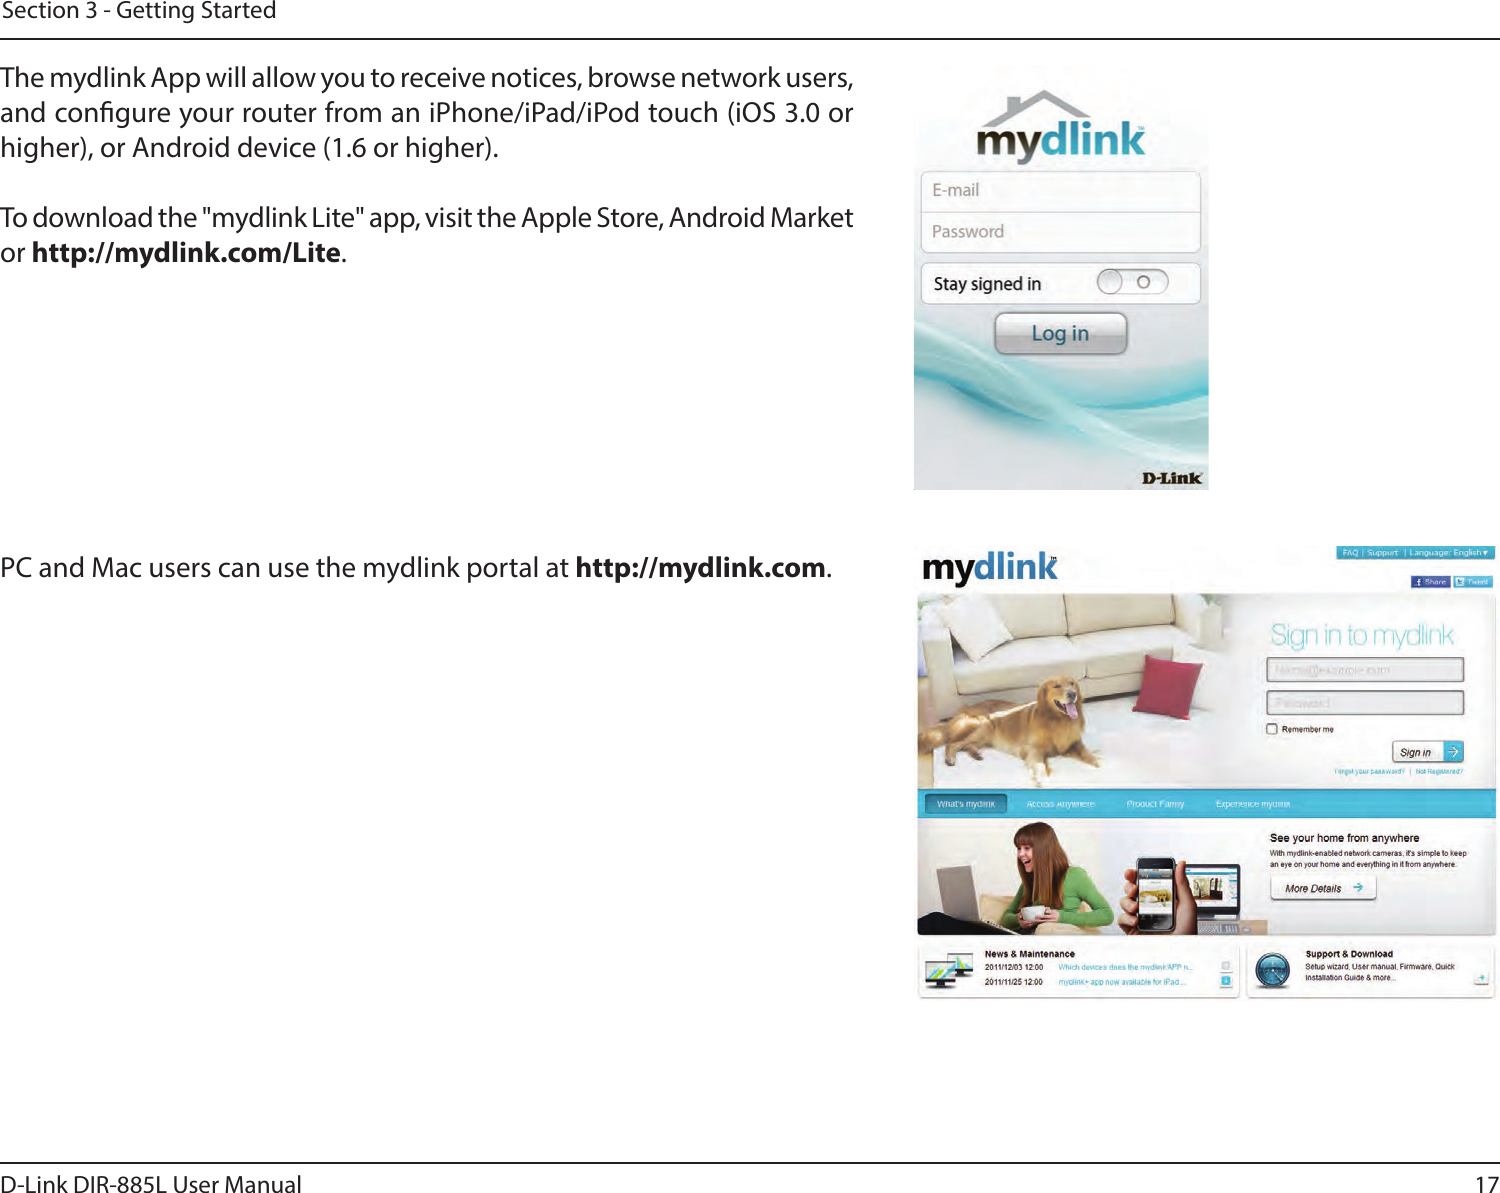 17D-Link DIR-885L User ManualSection 3 - Getting StartedThe mydlink App will allow you to receive notices, browse network users, and congure your router from an iPhone/iPad/iPod touch (iOS 3.0 or higher), or Android device (1.6 or higher).To download the &quot;mydlink Lite&quot; app, visit the Apple Store, Android Market or http://mydlink.com/Lite. PC and Mac users can use the mydlink portal at http://mydlink.com.